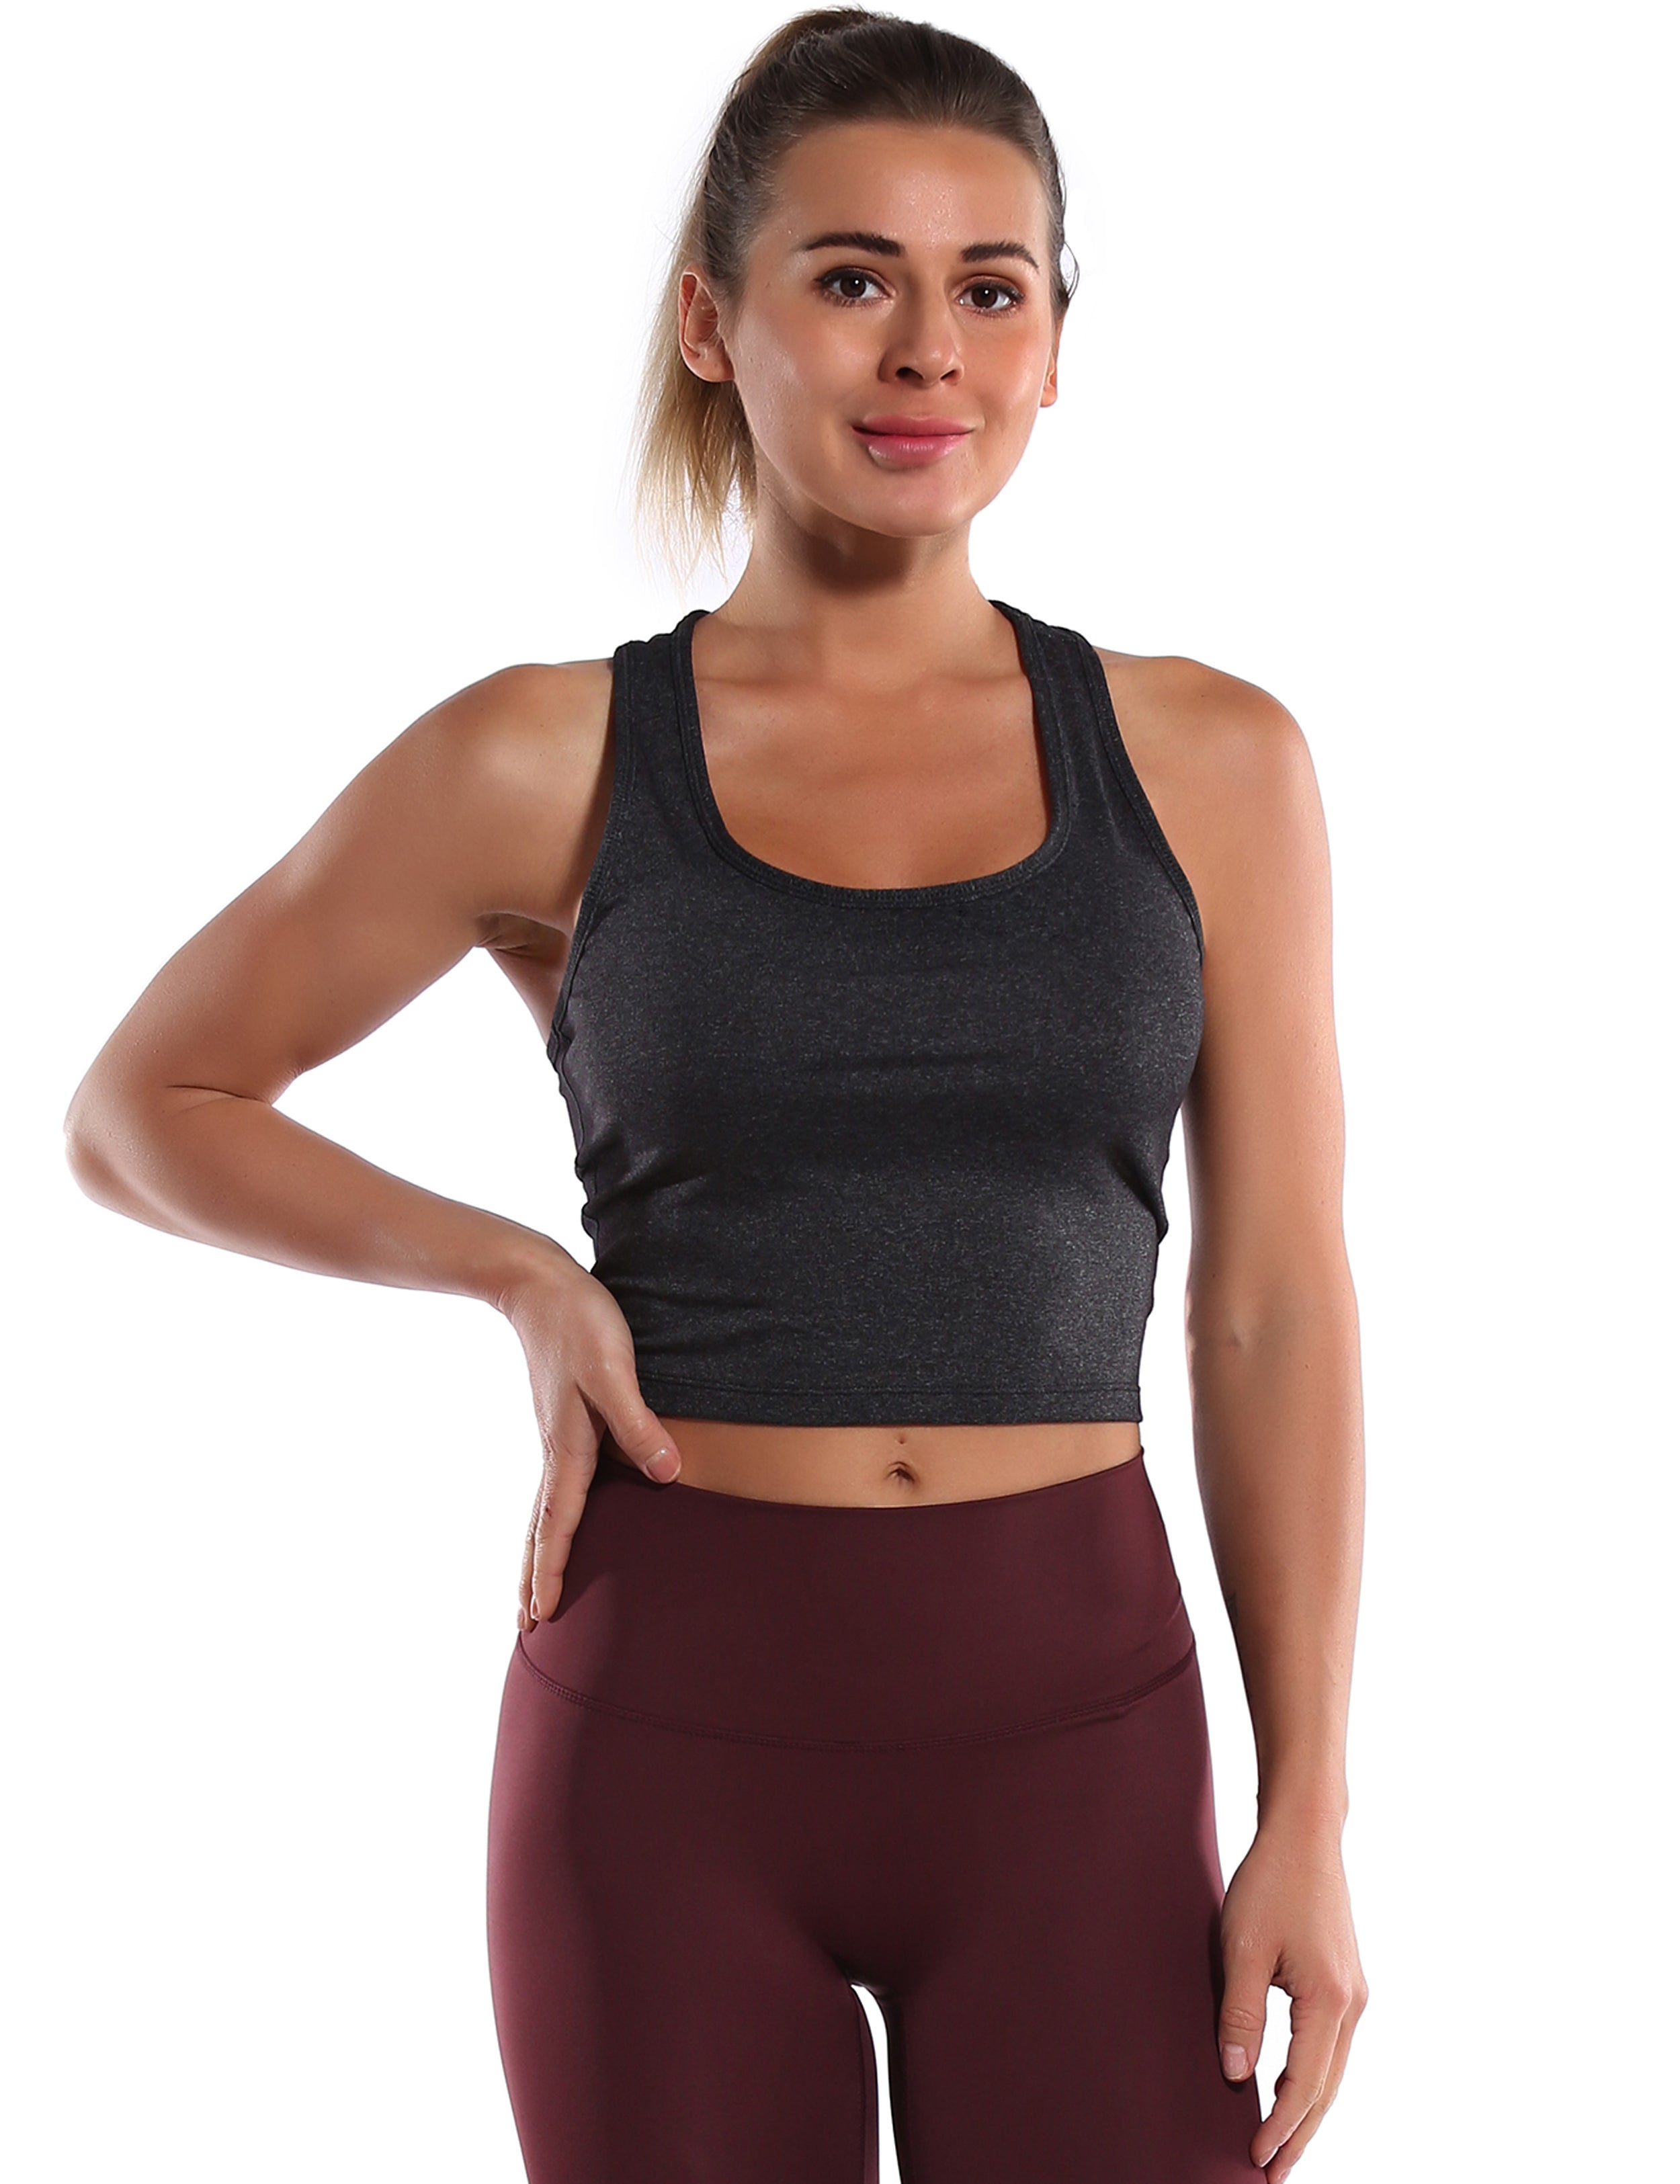 Racerback Athletic Crop Tank Tops heathercharcoal 92%Nylon/8%Spandex(Cotton Soft) Designed for Golf Tight Fit So buttery soft, it feels weightless Sweat-wicking Four-way stretch Breathable Contours your body Sits below the waistband for moderate, everyday coverage